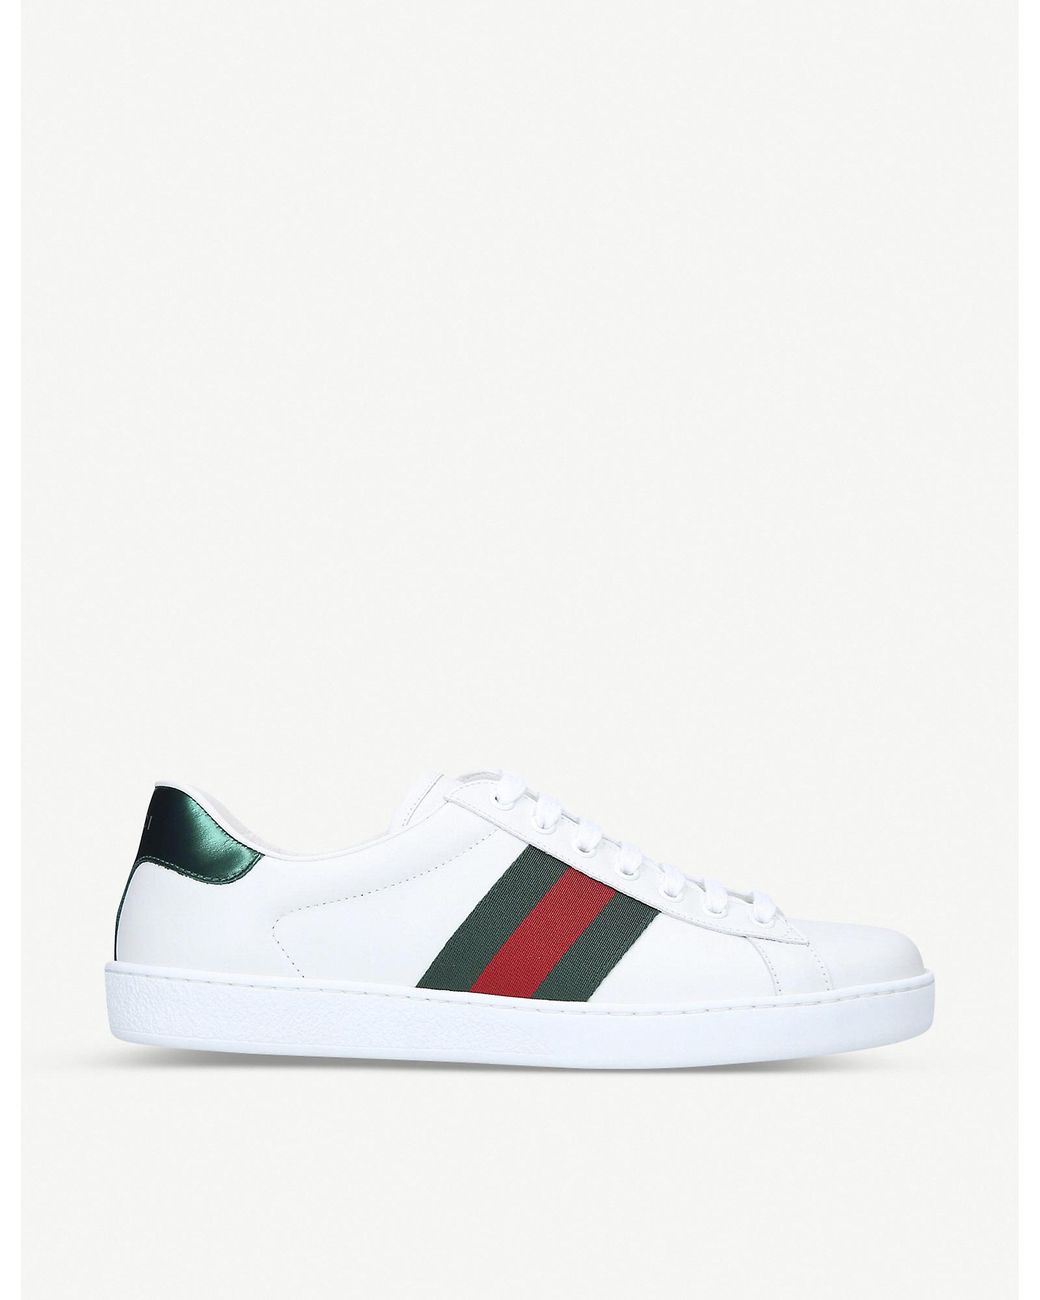 Gucci Mens White Men's New Ace Leather Trainers Eur 40 / 6 Uk Men for ...